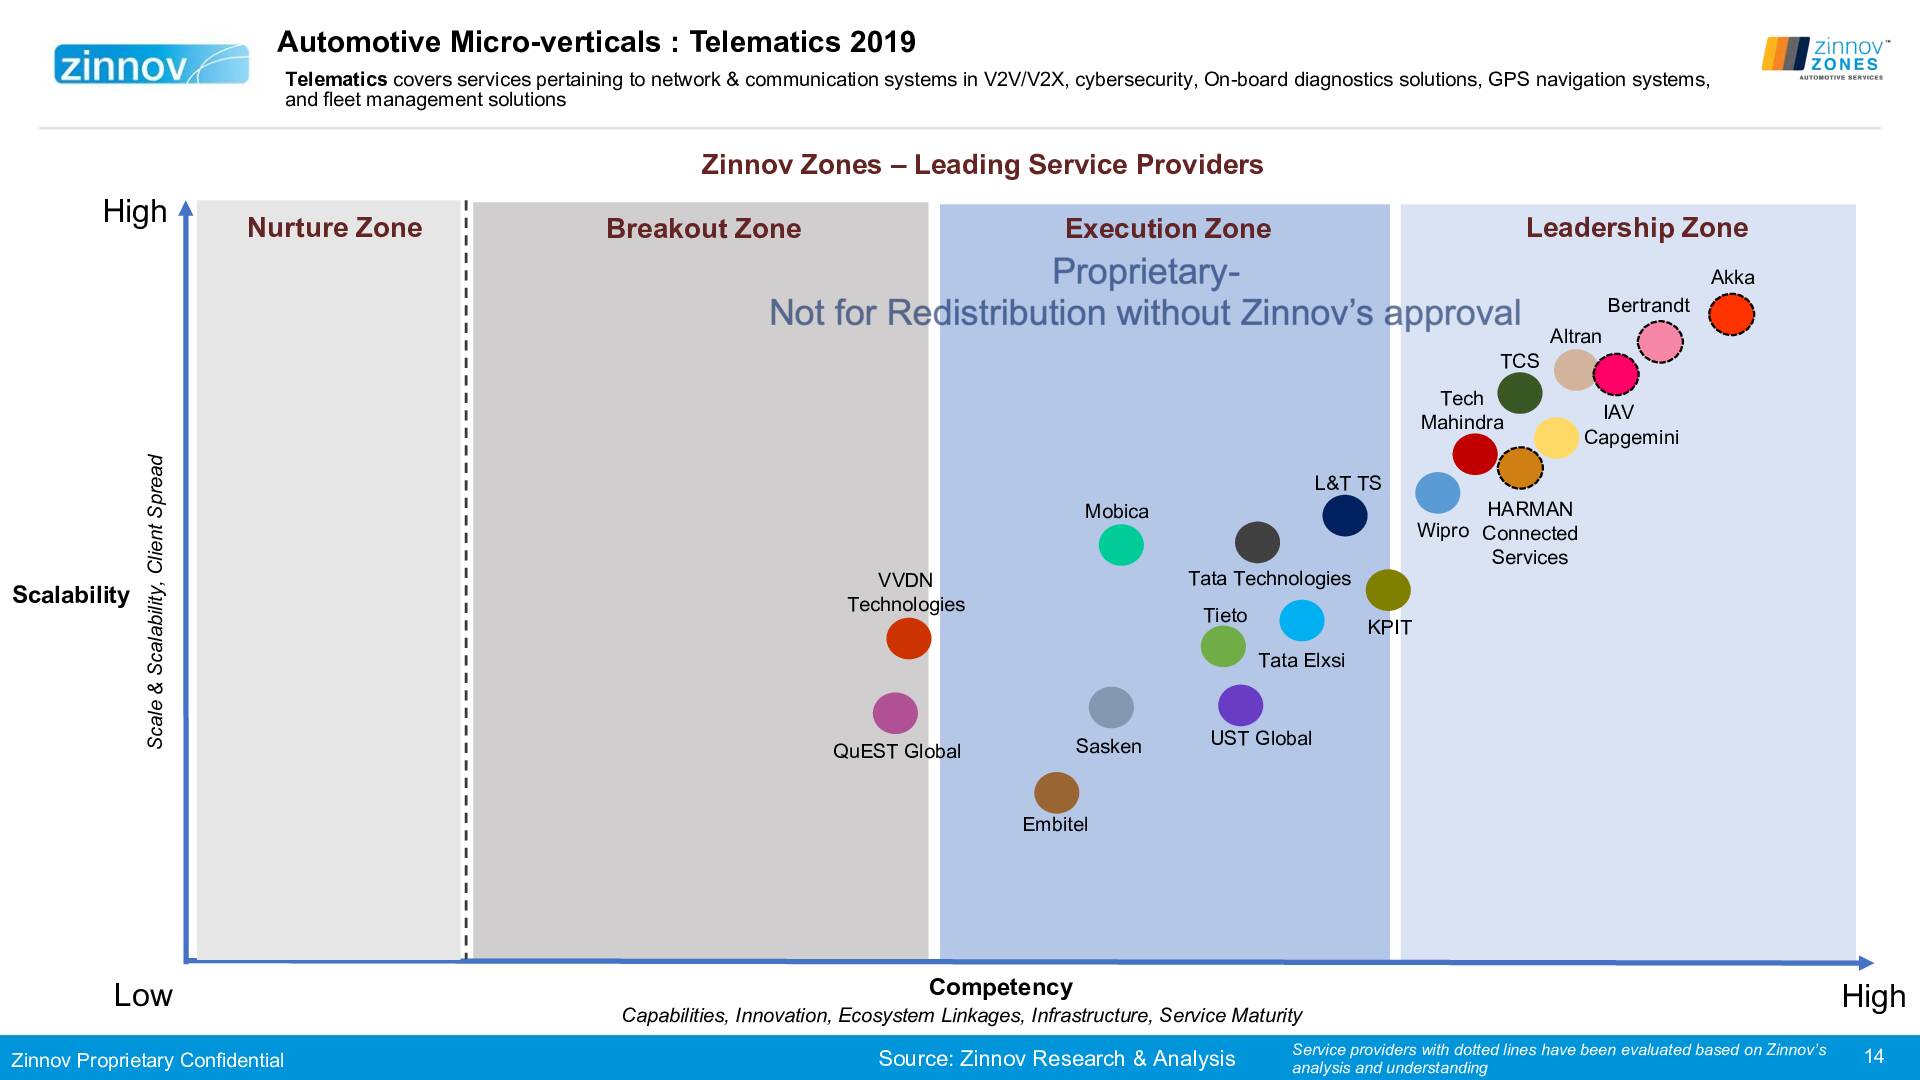 Zinnov Zones Automotive E Rd Services 2019 Ratings14